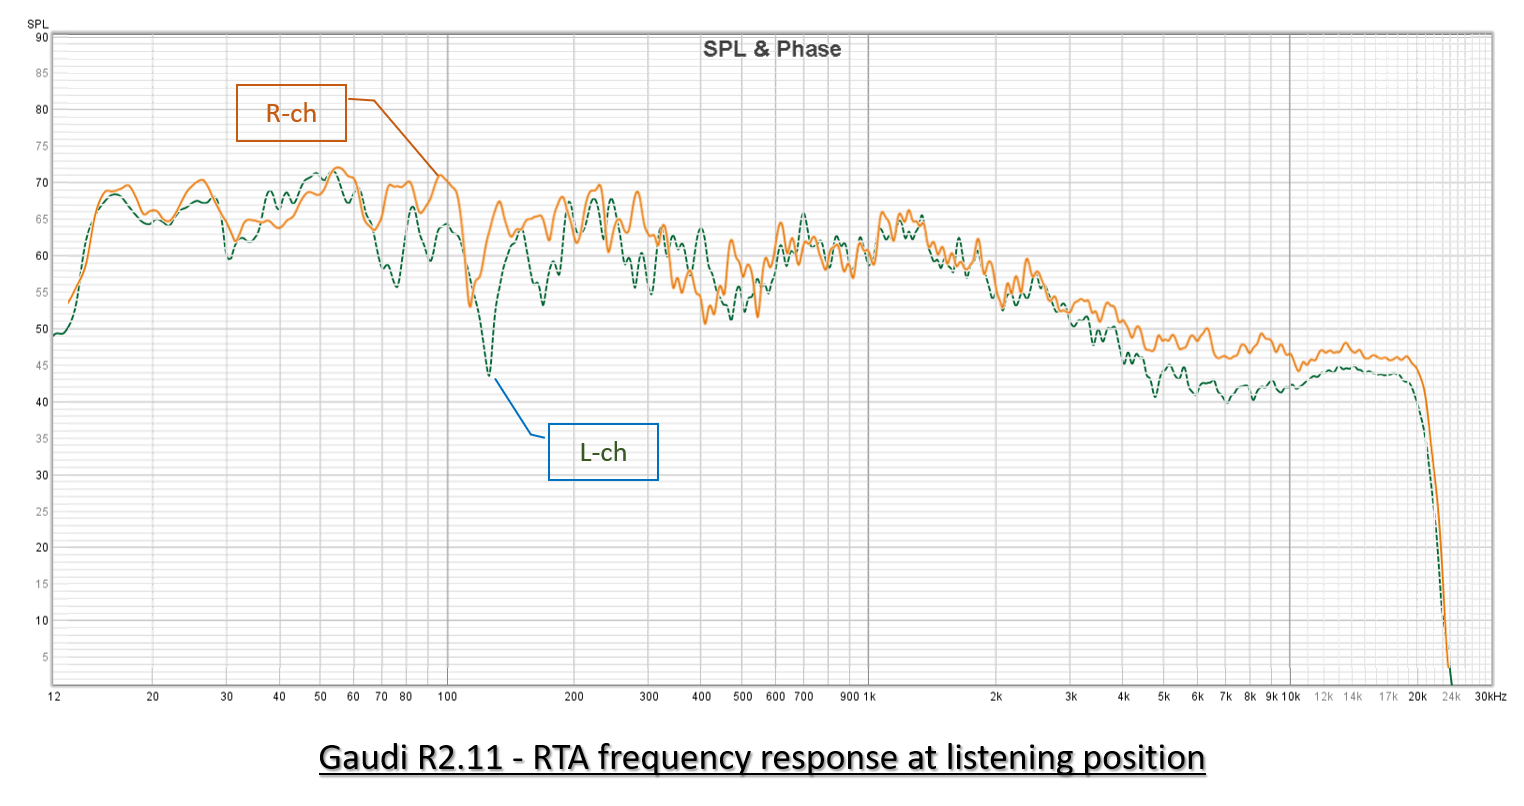 RTA frequency response at listening position